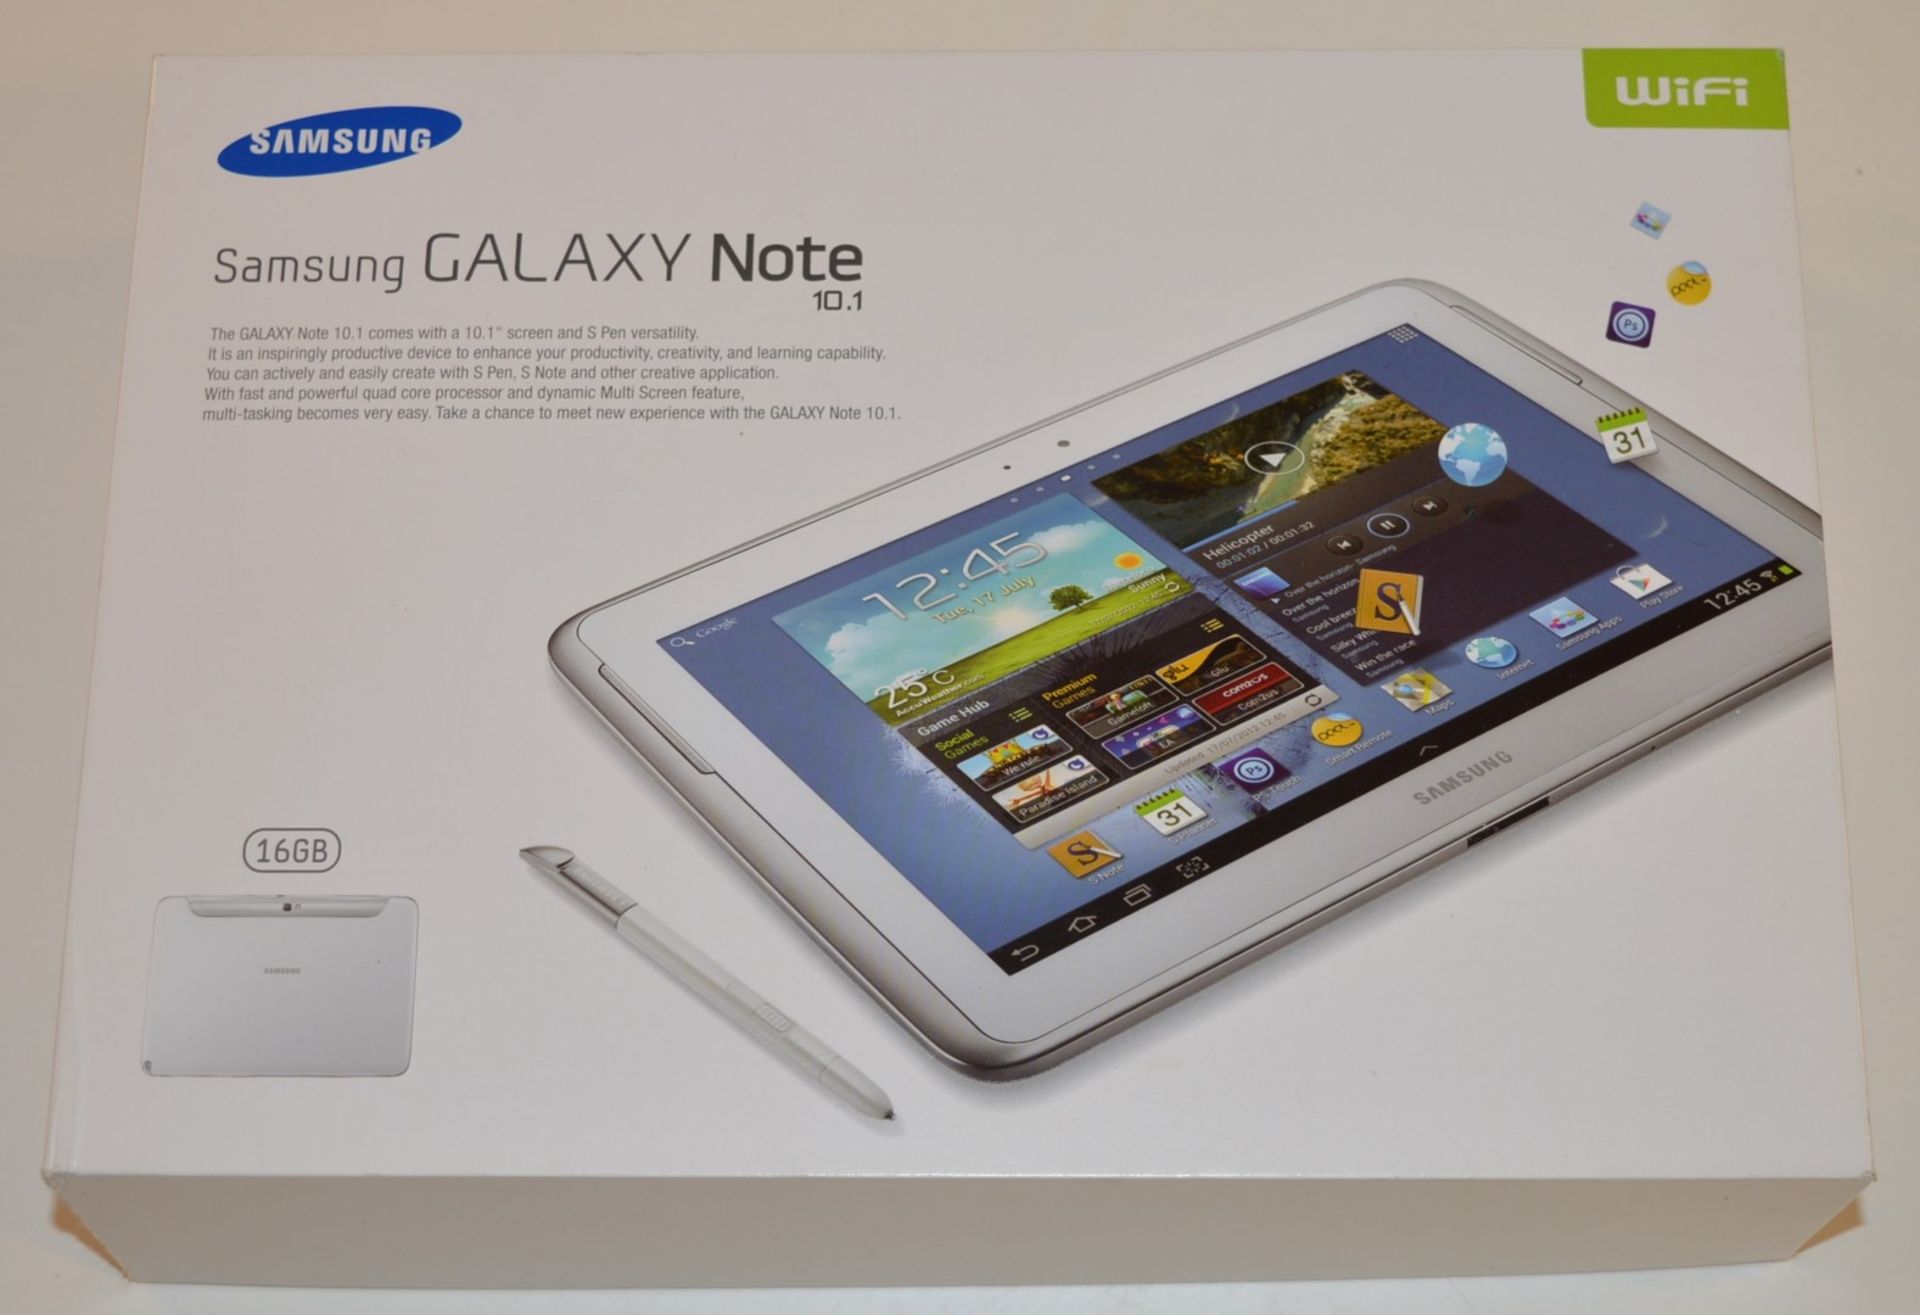 1 x Samsung Galaxy Note 10.1 Tablet Computer - Features Quad Core 1.4ghz Processor, 2gb Ram, 16gb - Image 6 of 10